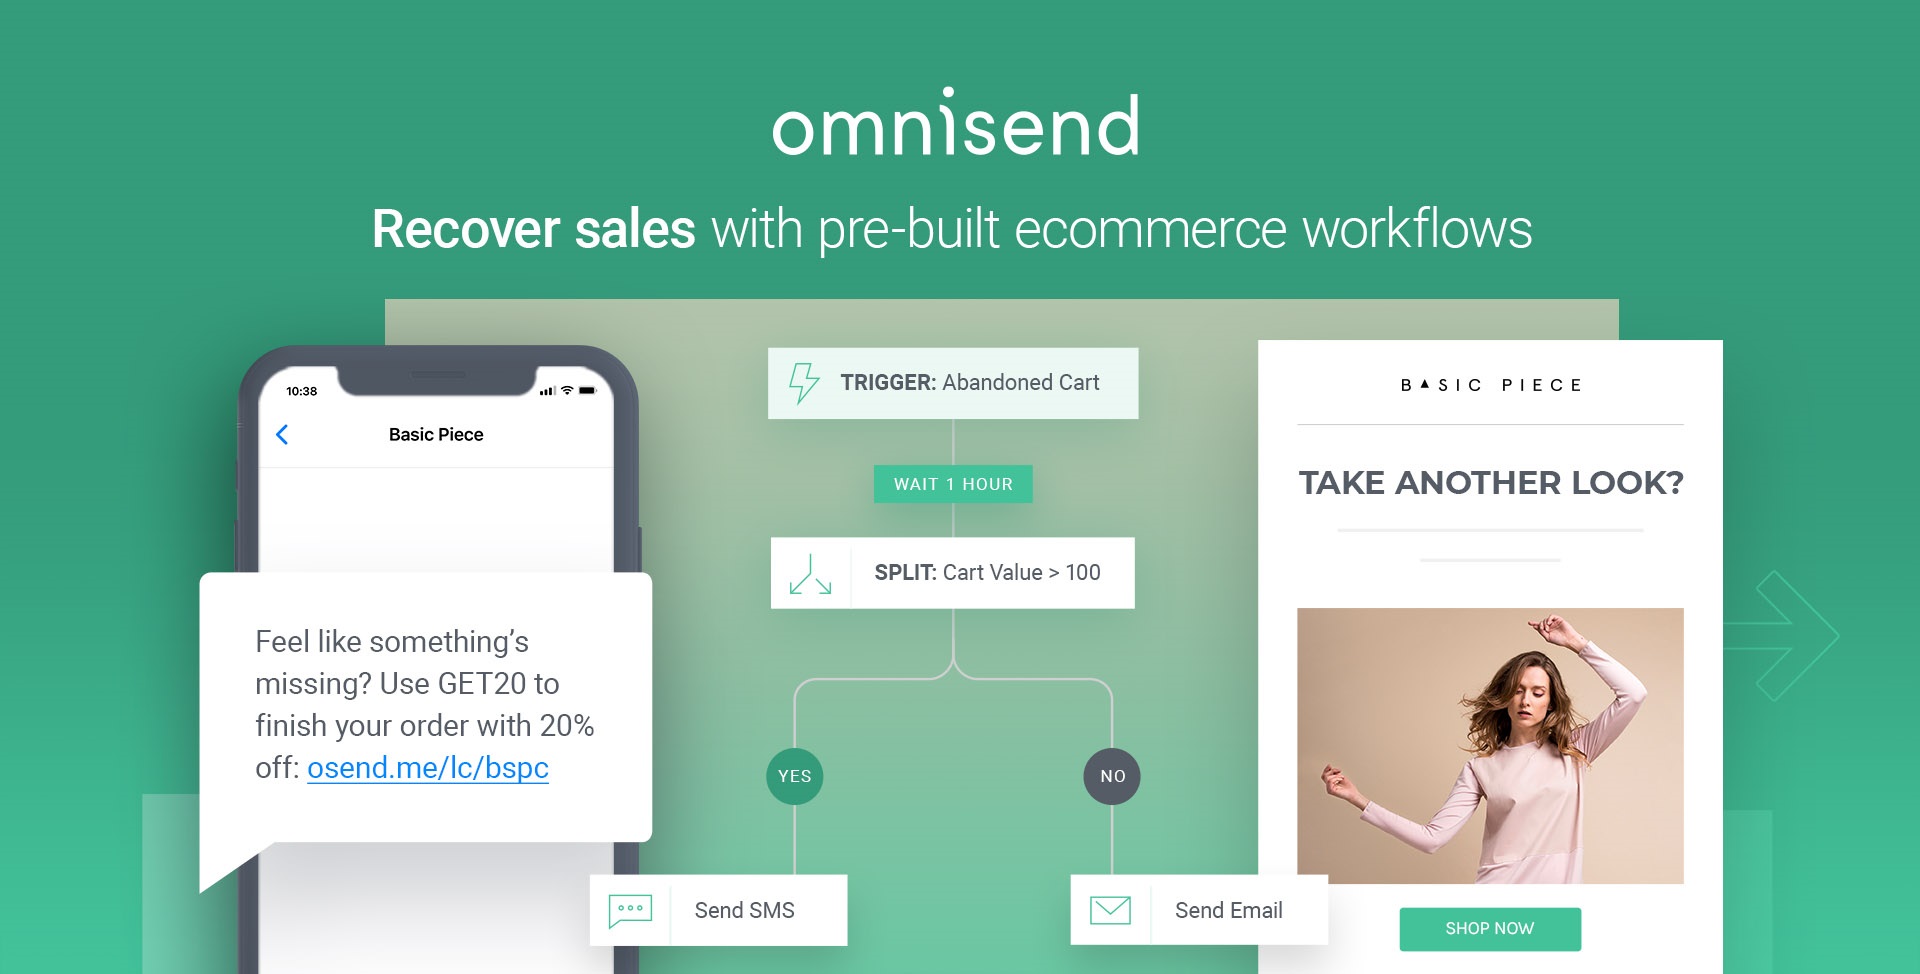 Know more about Omnisend